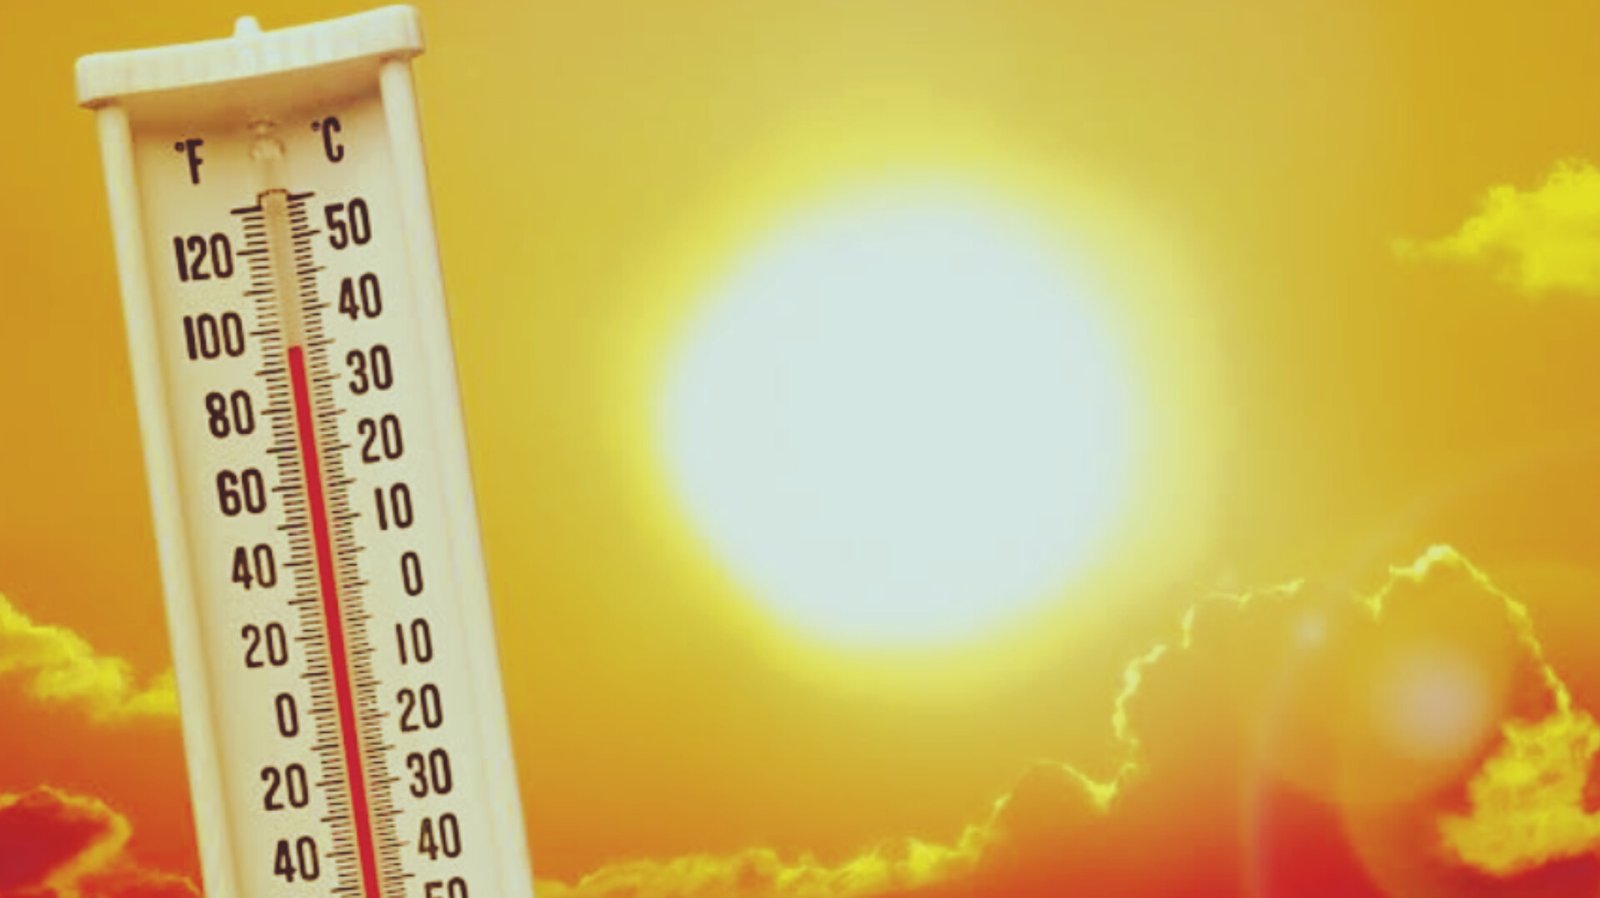 Heat wave warning issued for seven Odisha districts